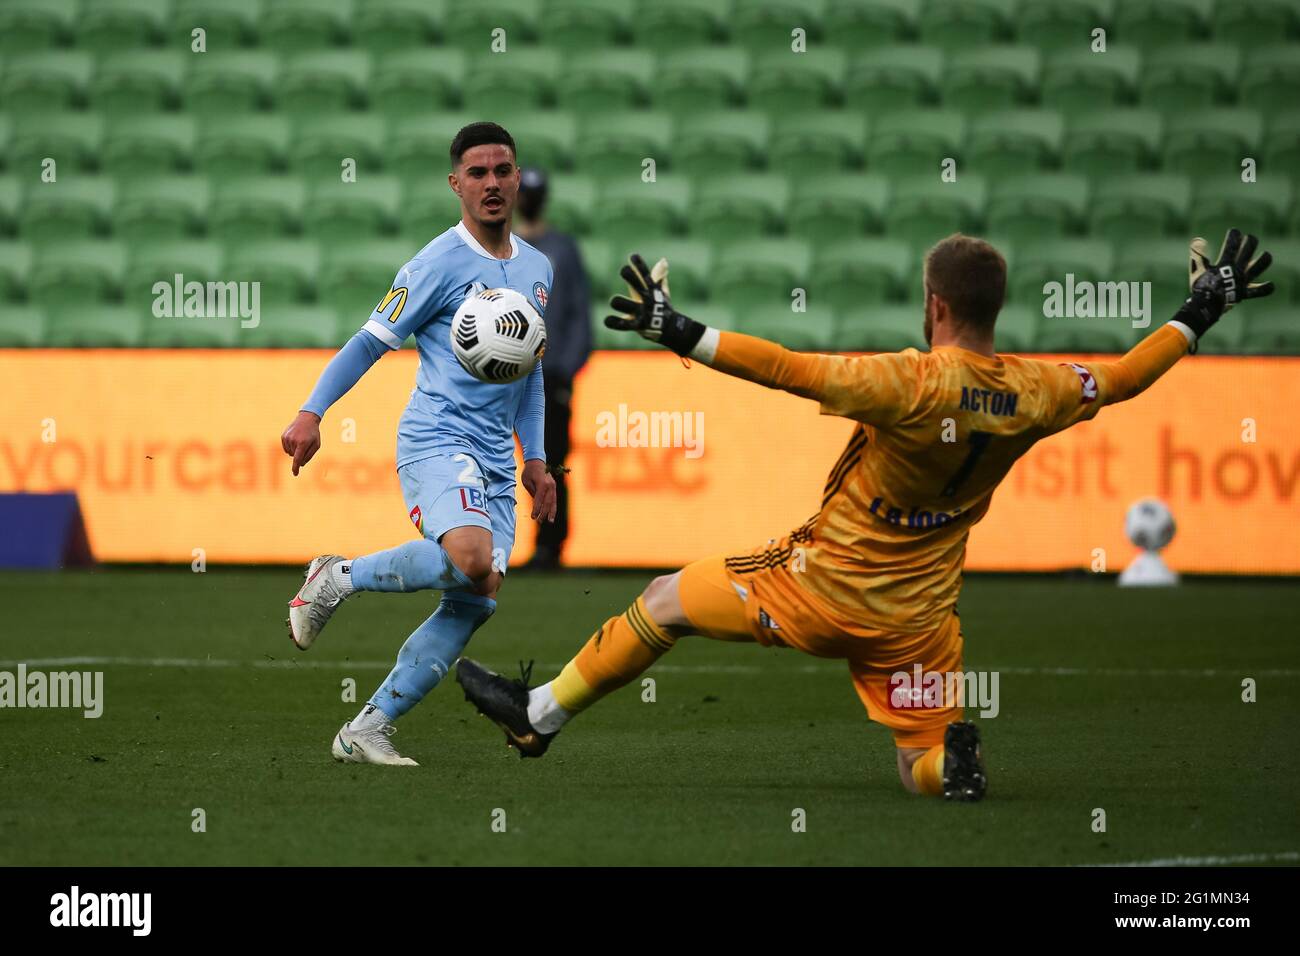 Melbourne, Australia, 6 June, 2021. Matt Acton of Melbourne Victory blocks the ball during Round 24 of the Melbourne Victory v Melbourne City FC A-League match, Australia. Credit: Dave Hewison/Alamy Live News Stock Photo